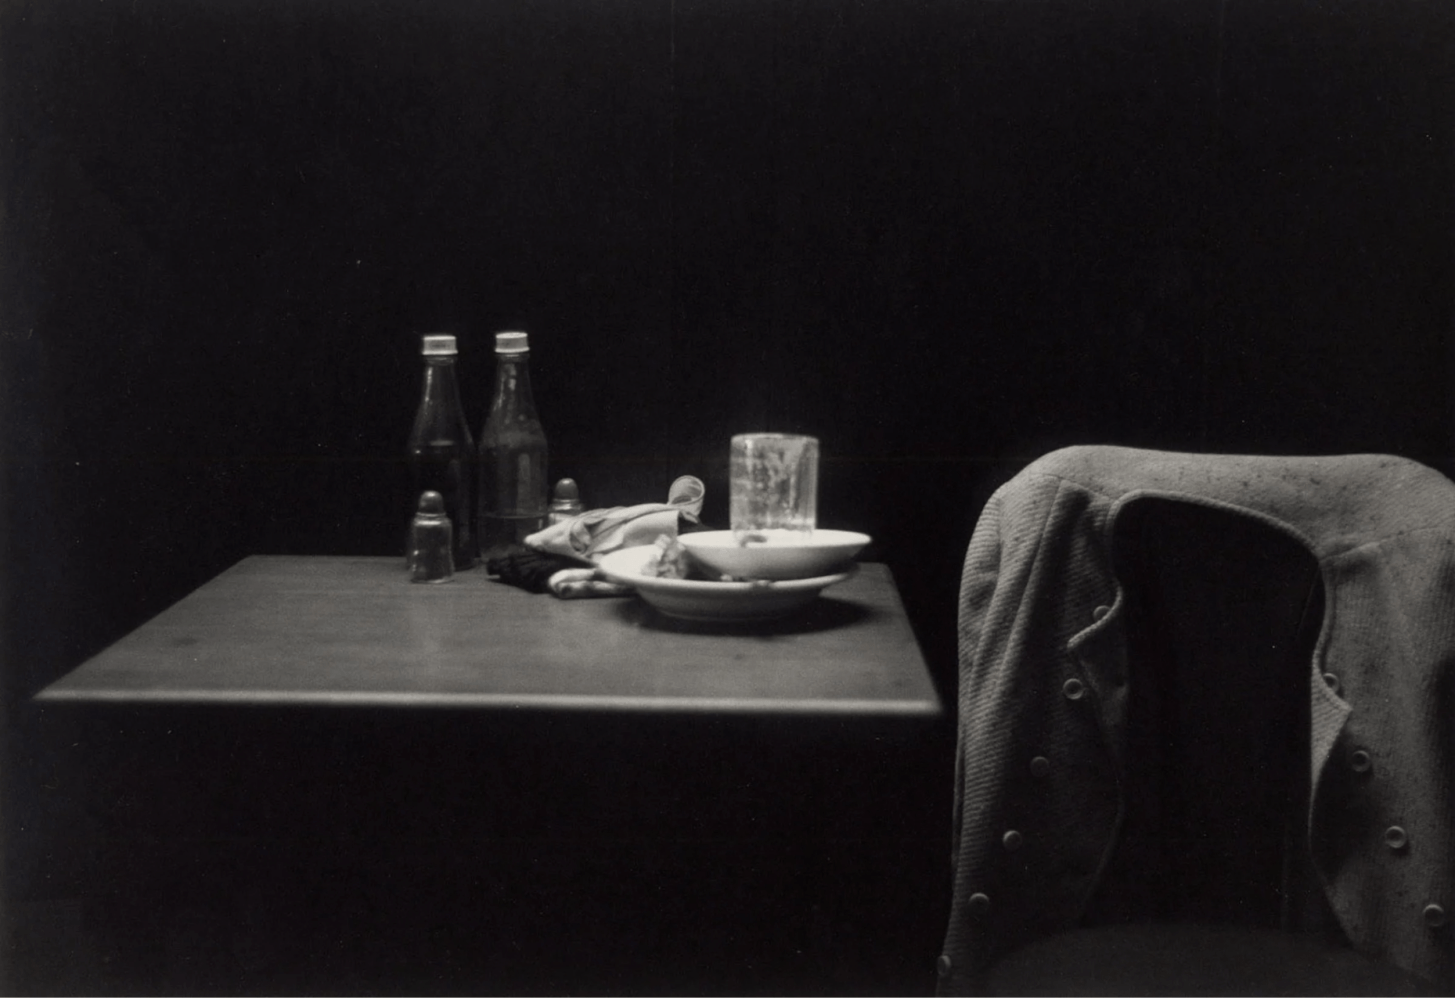 Roy deCarava

Ketchup Bottle, Table, and Coat, 1952

photograph

9 x 13 inches